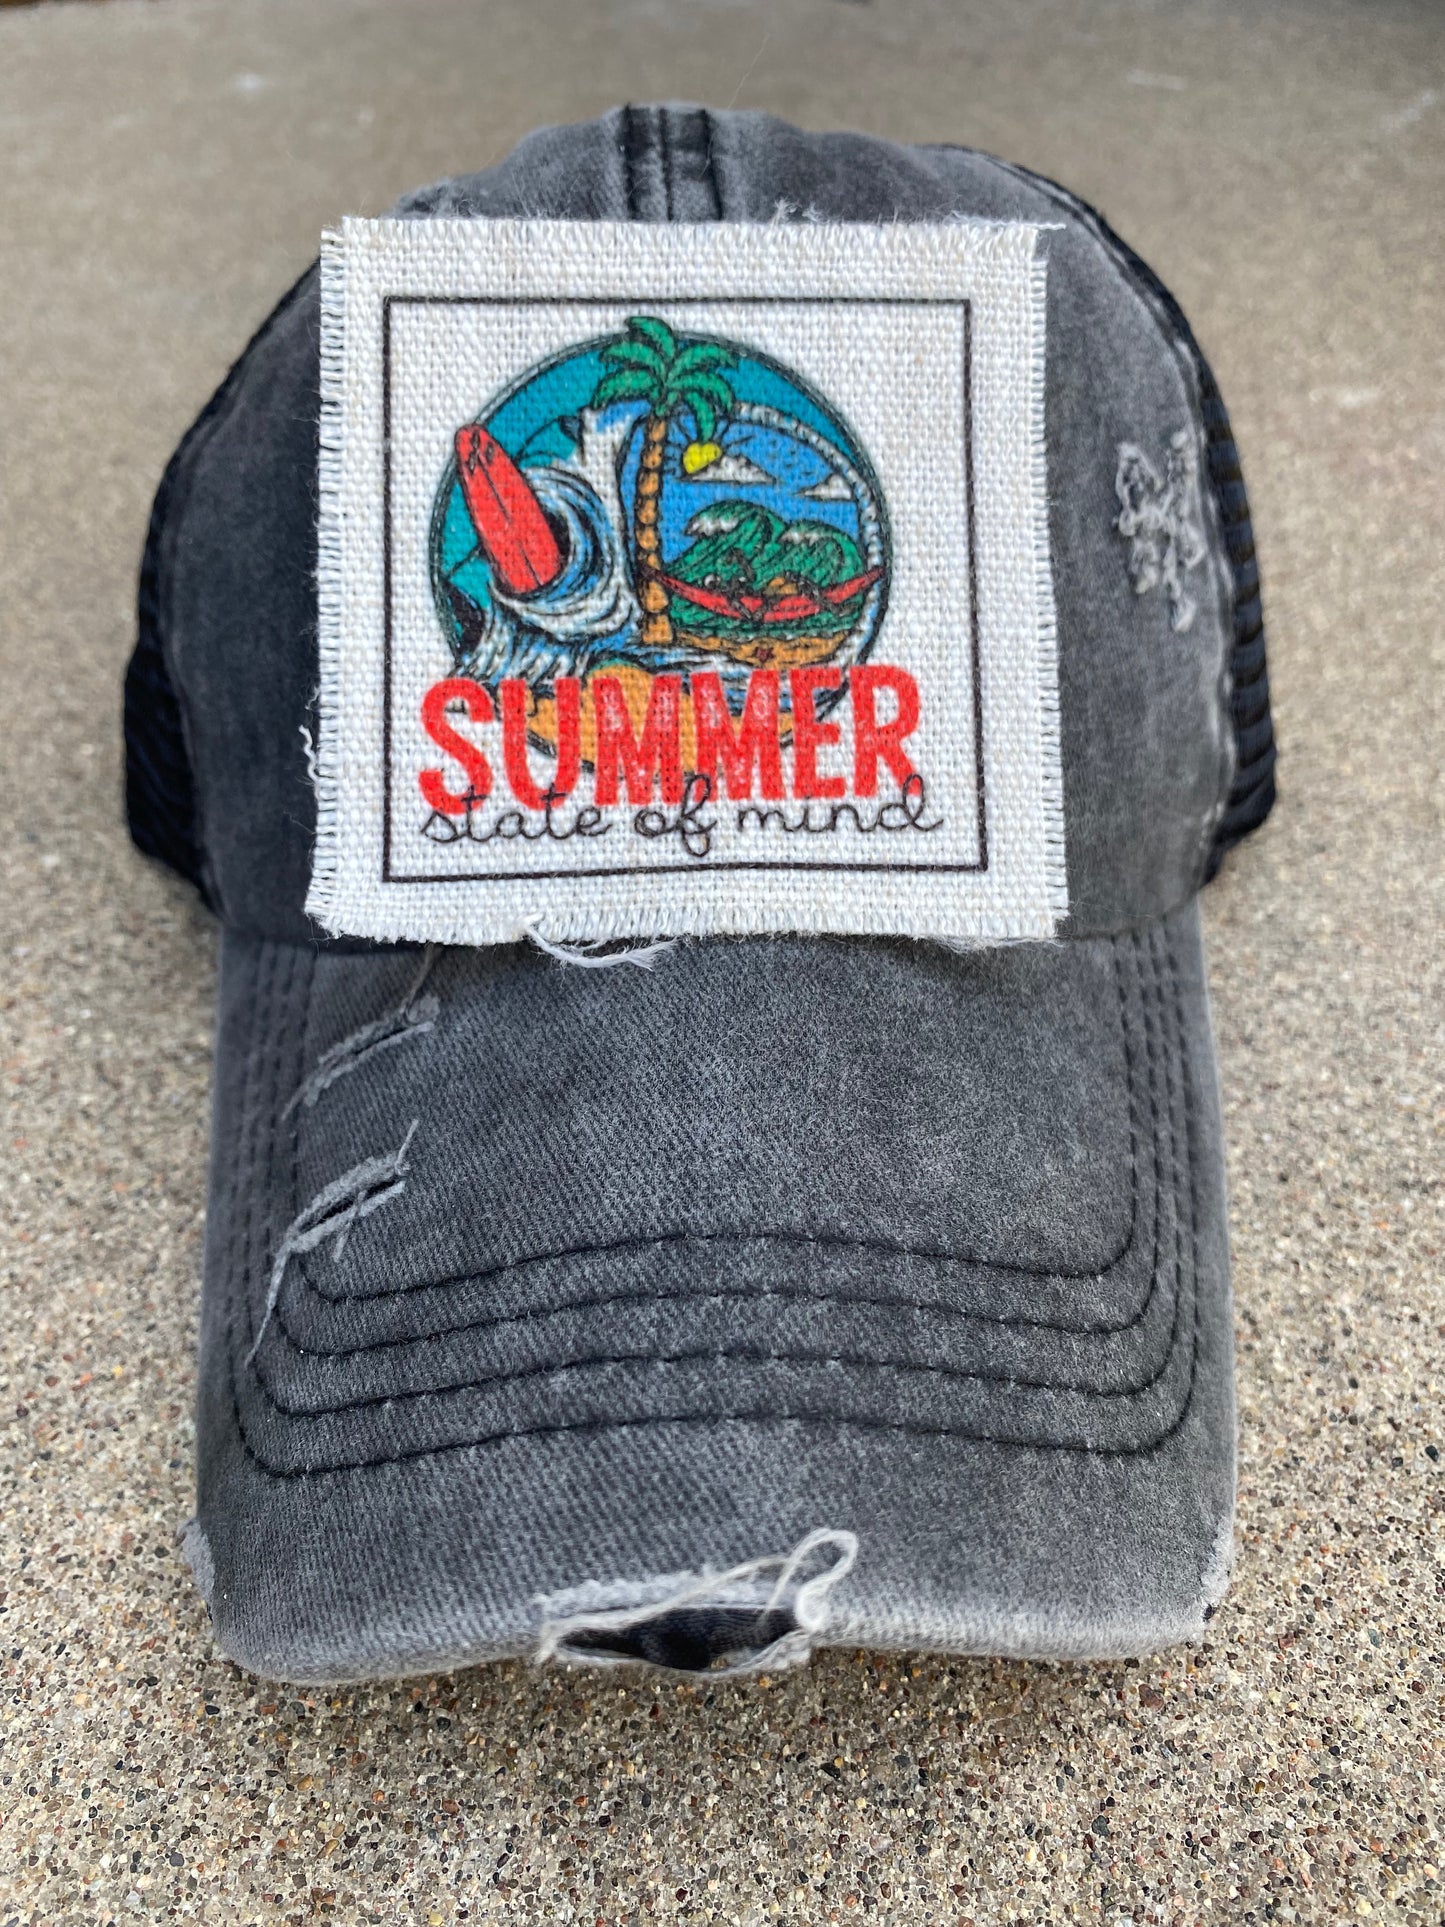 Summer State of Mind Hat Patch